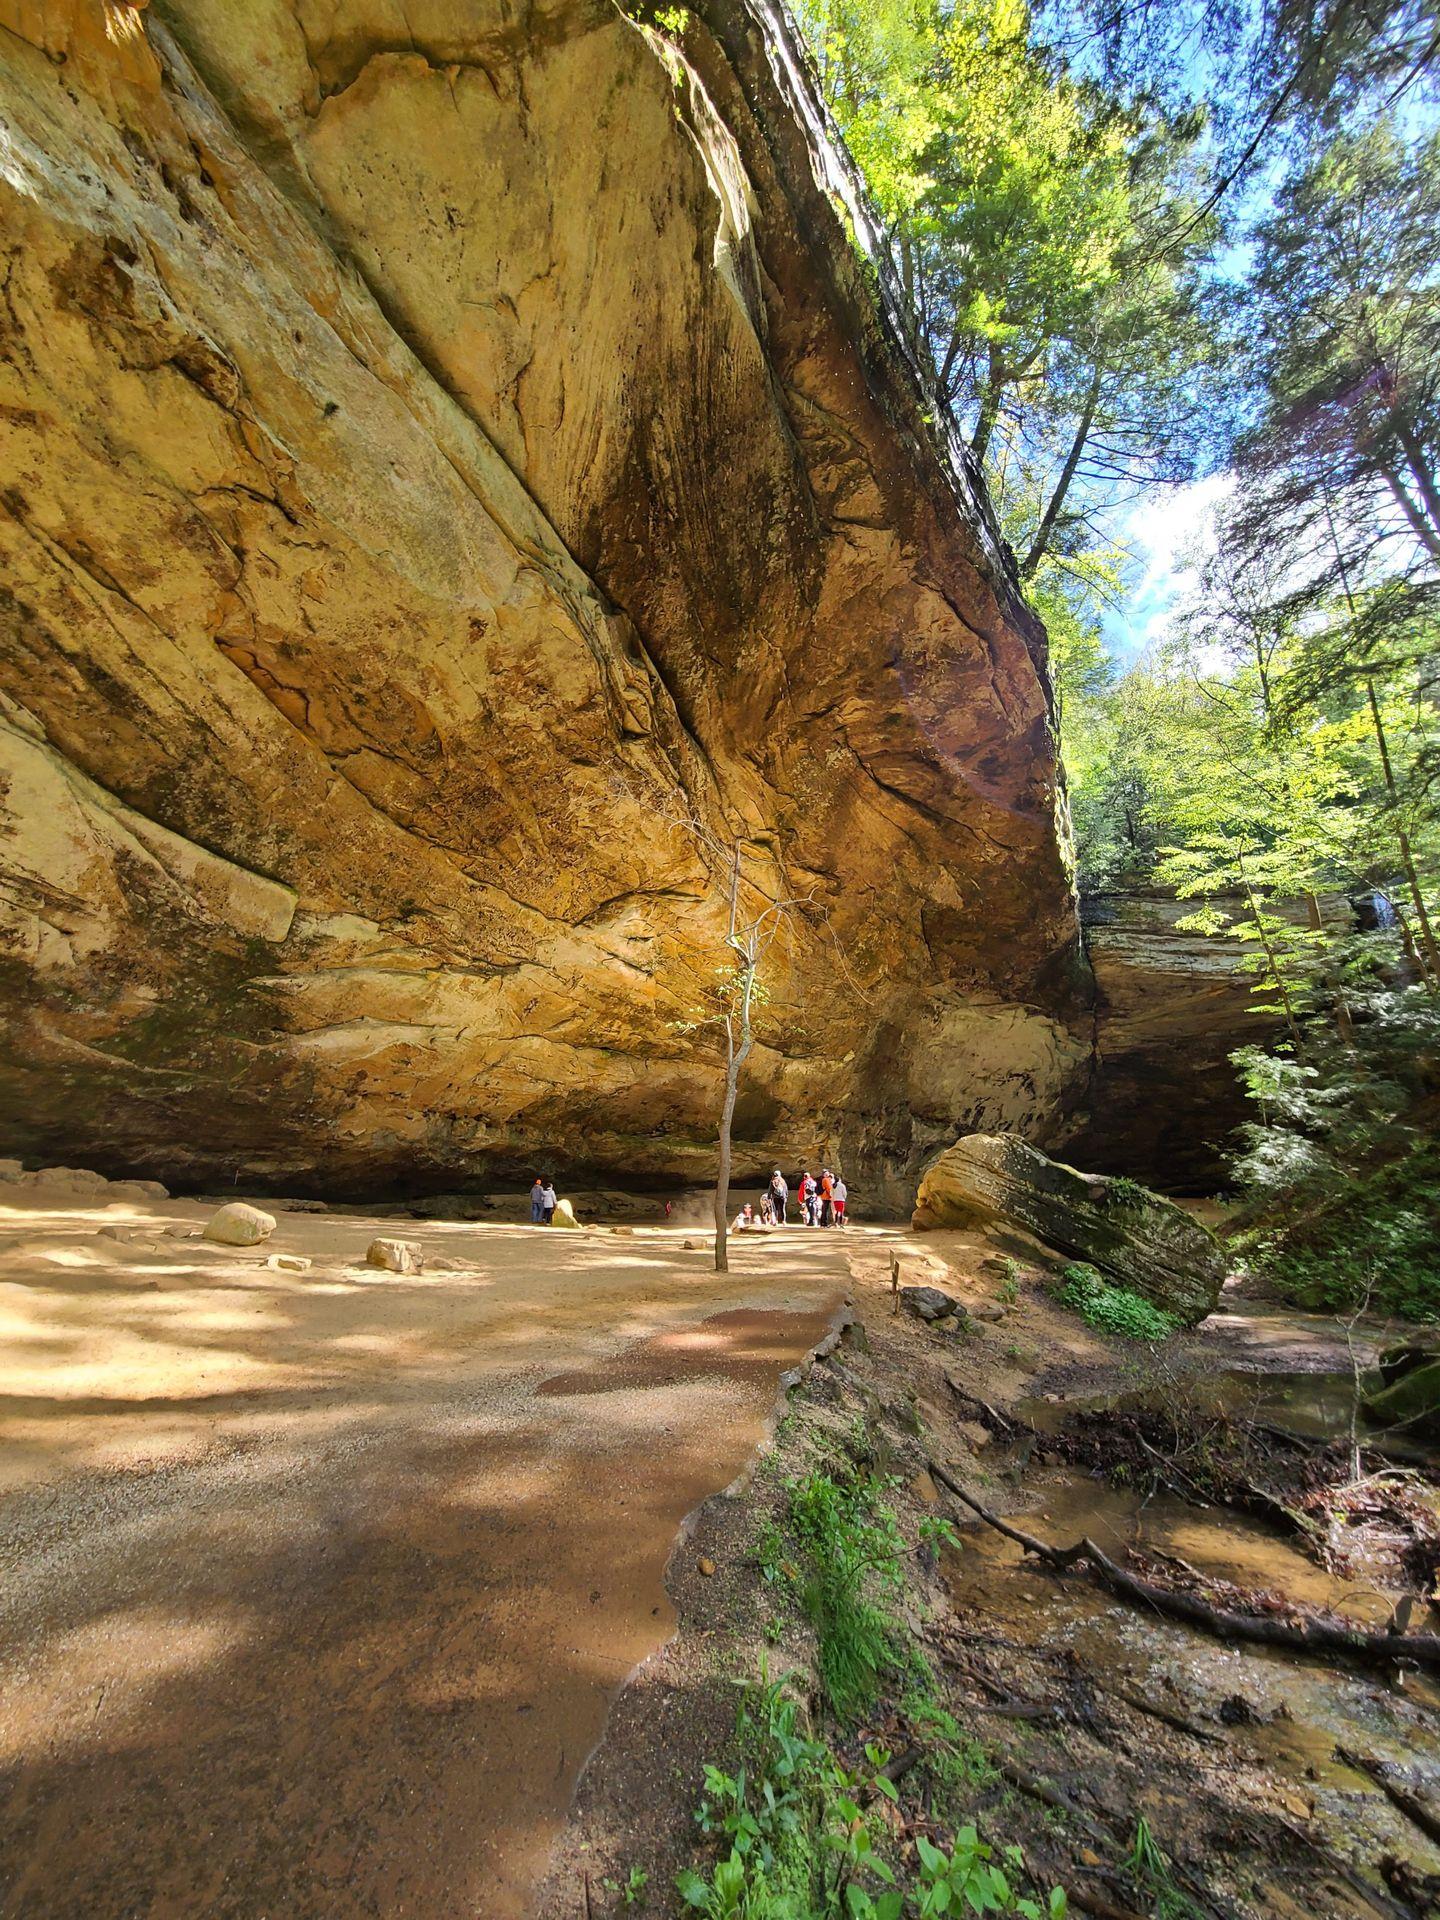 A large rock face and overhang area of the Old Man's Cave.